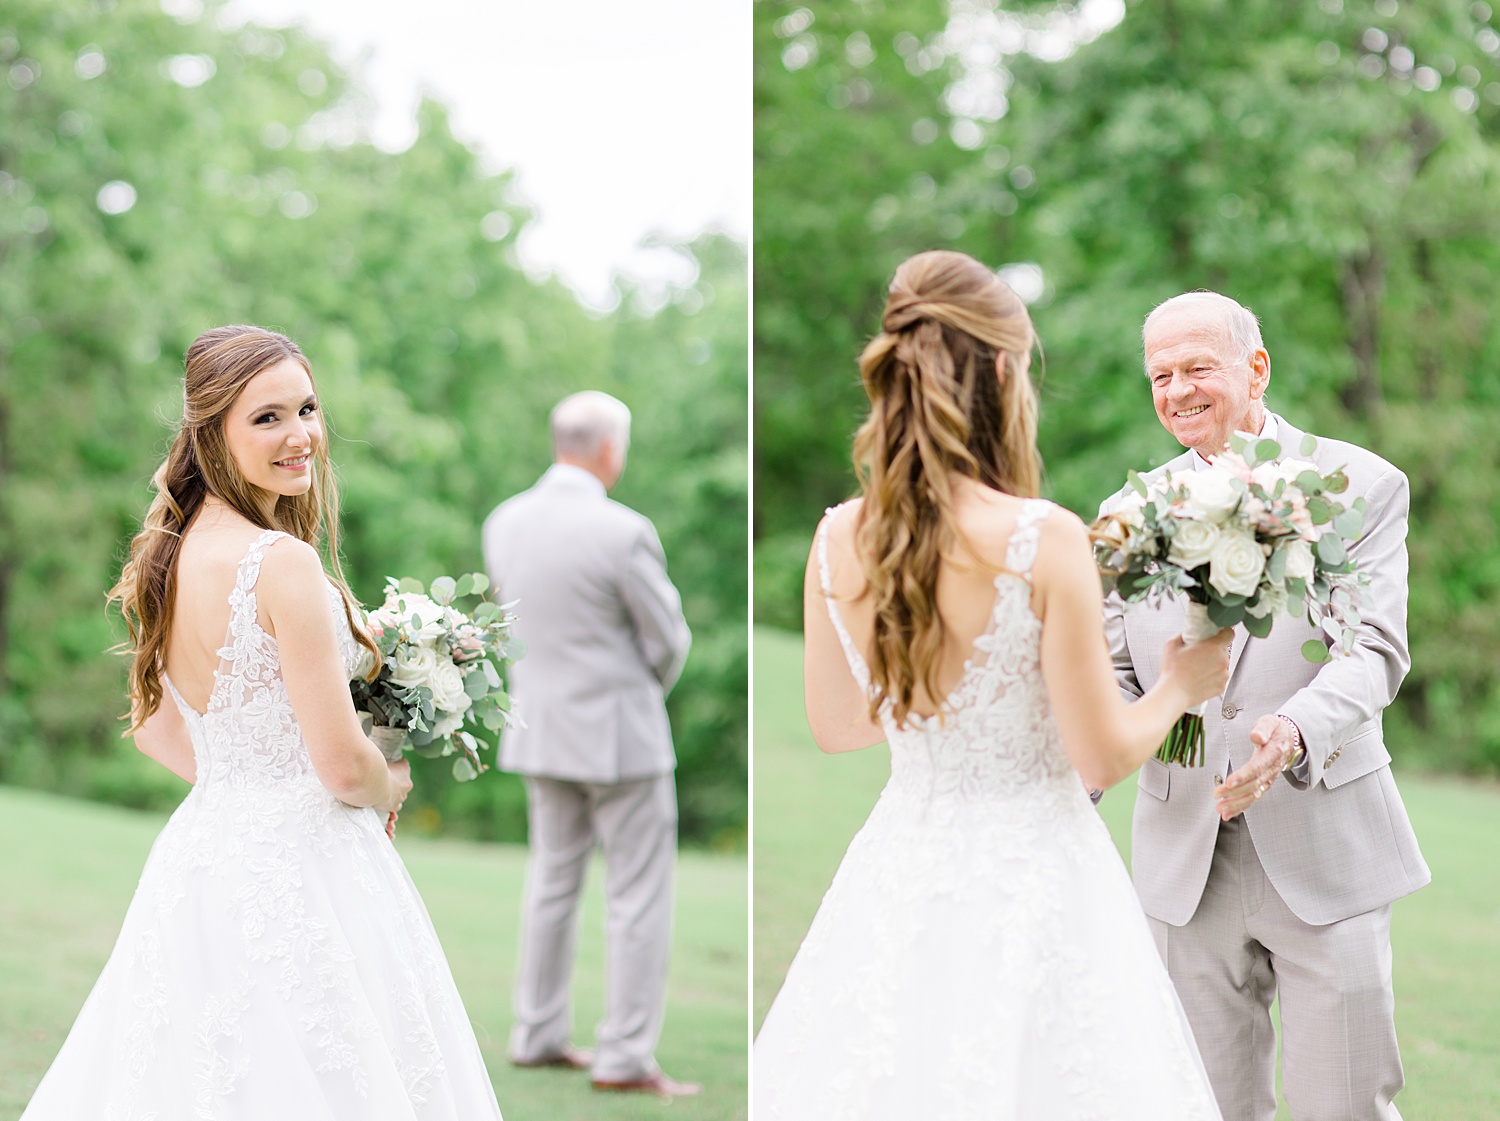 first look between the bride and her father at Weddings at Cabin Bluff